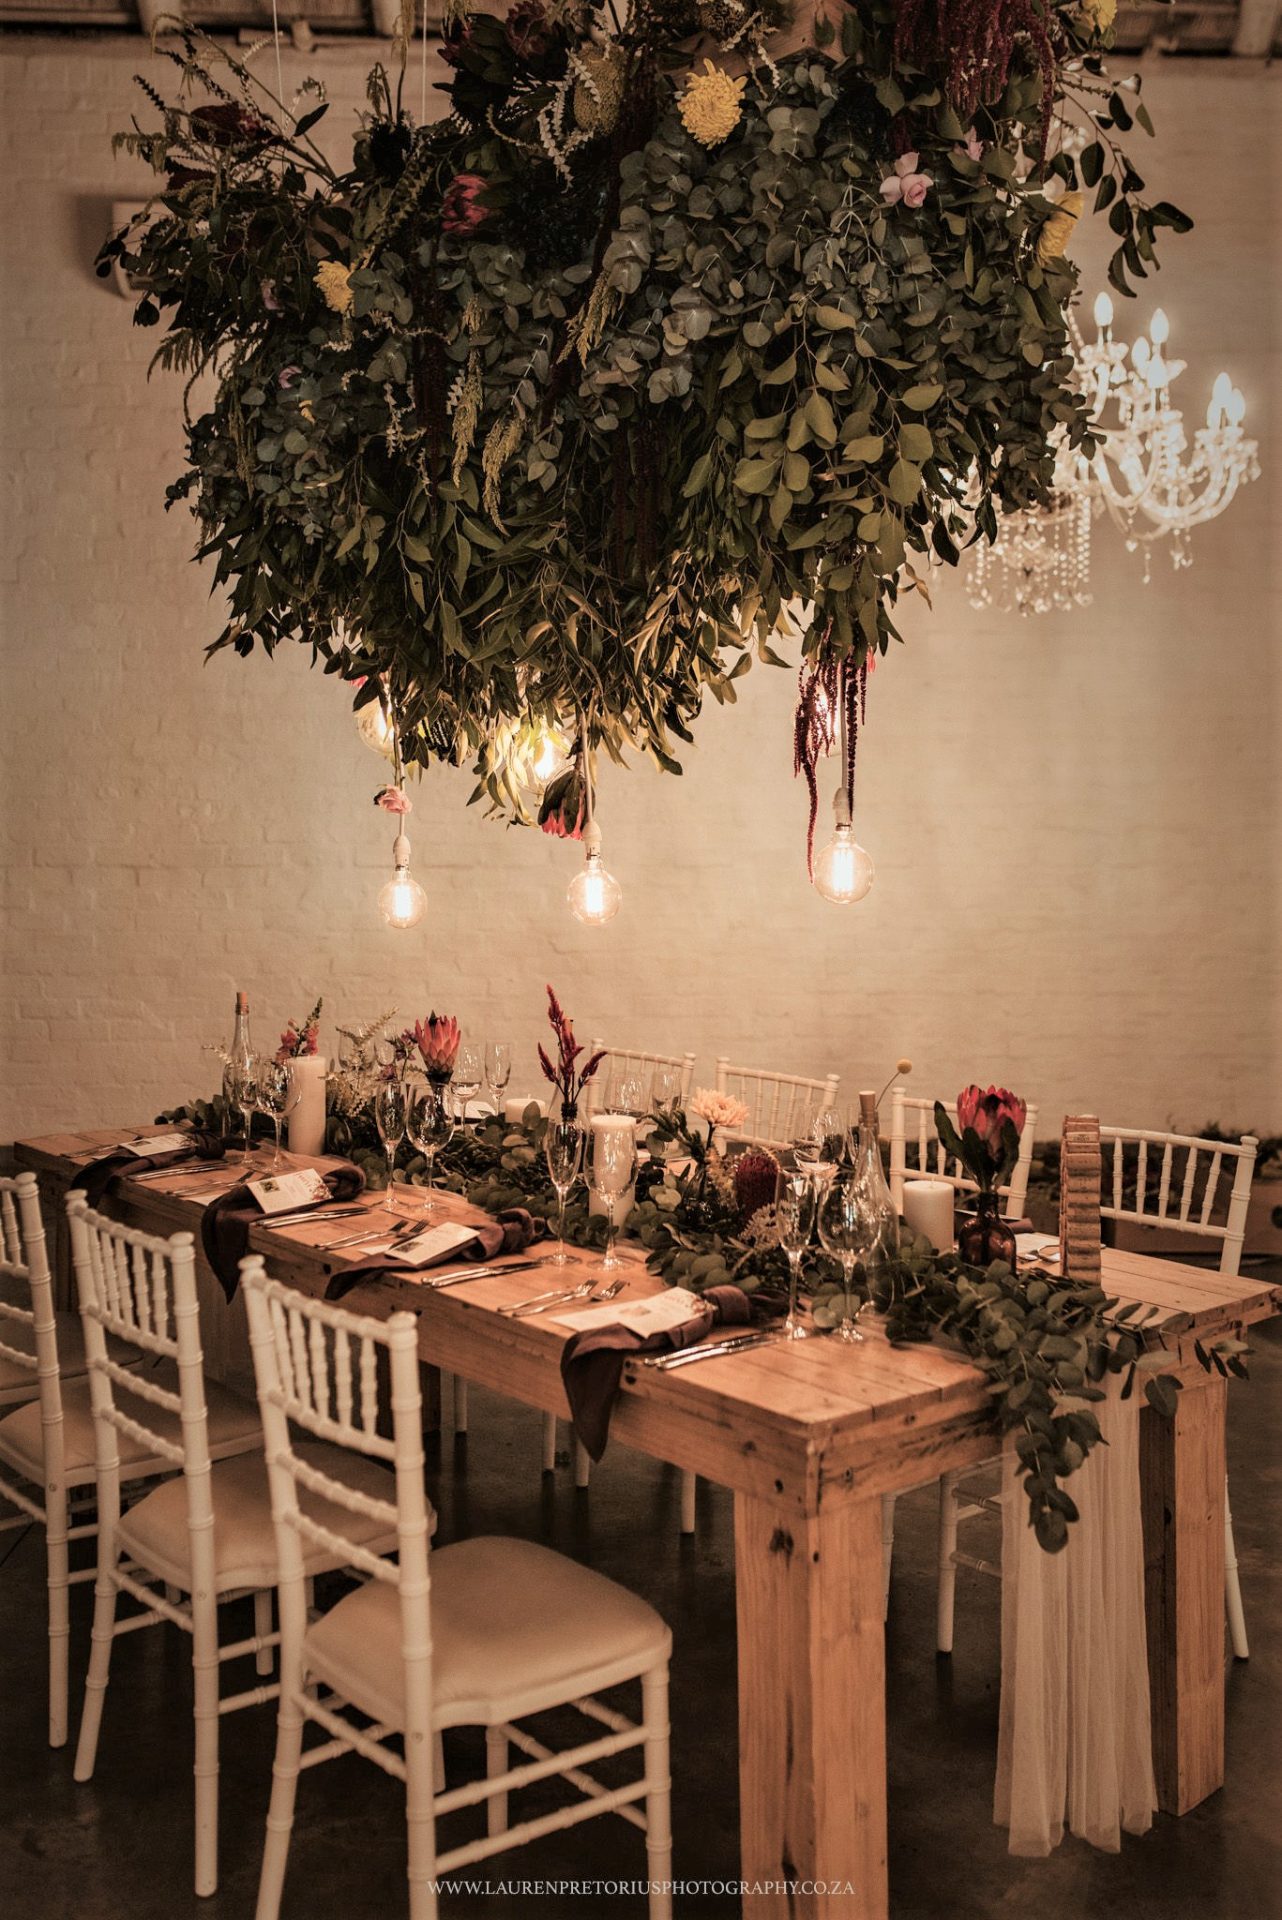 Greenery and Rosed Hanging From Ceilings With Bulb Lighting